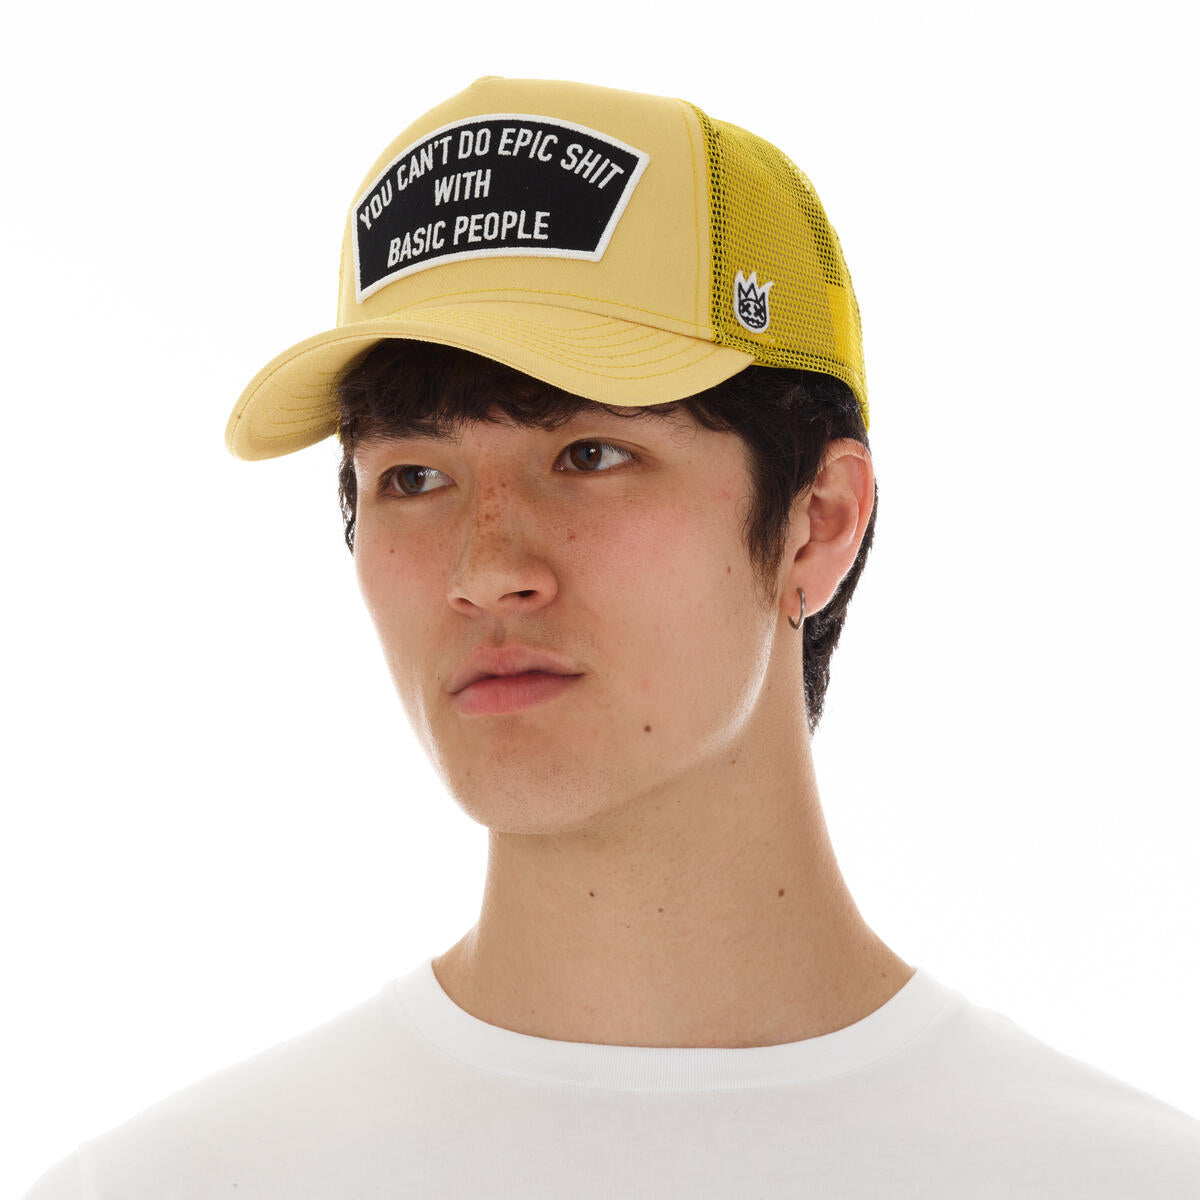 Side view of the vintage yellow trucker hat displaying the details on the side.